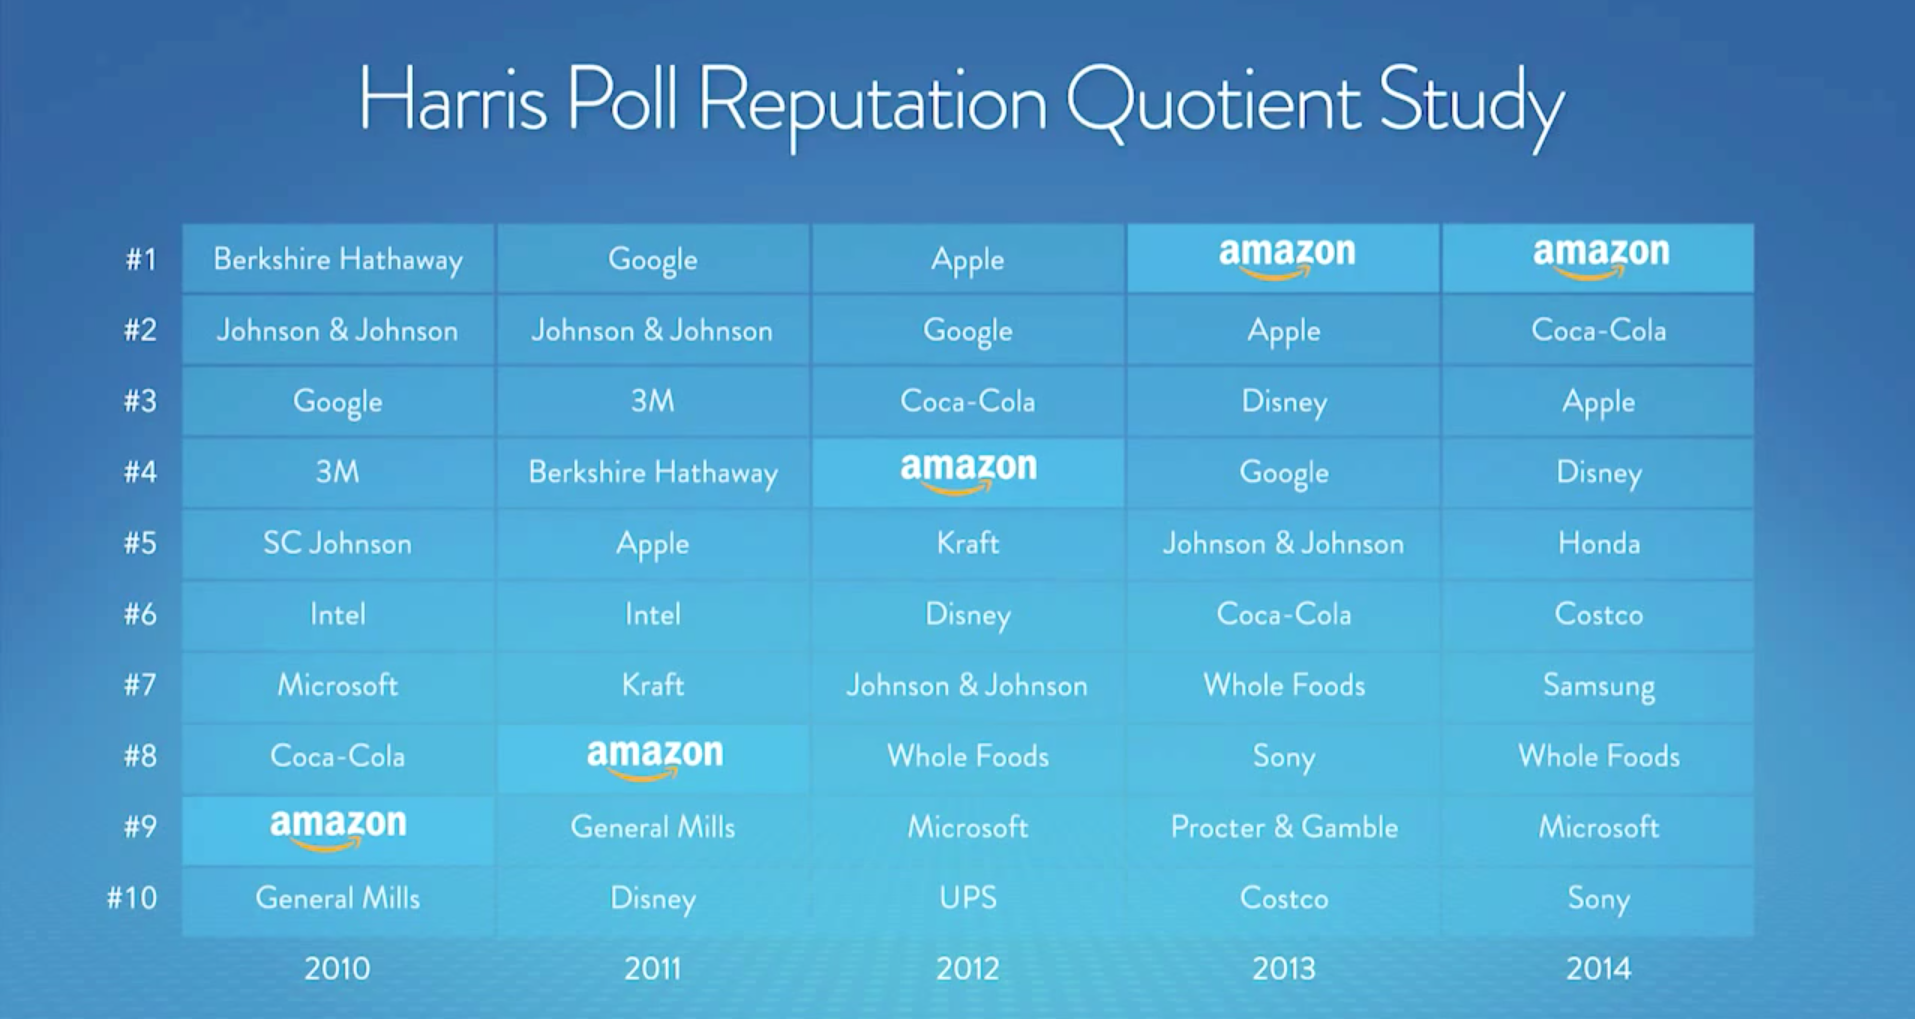 Harris Poll showing Amazon rising to #1 in customer satisfaction